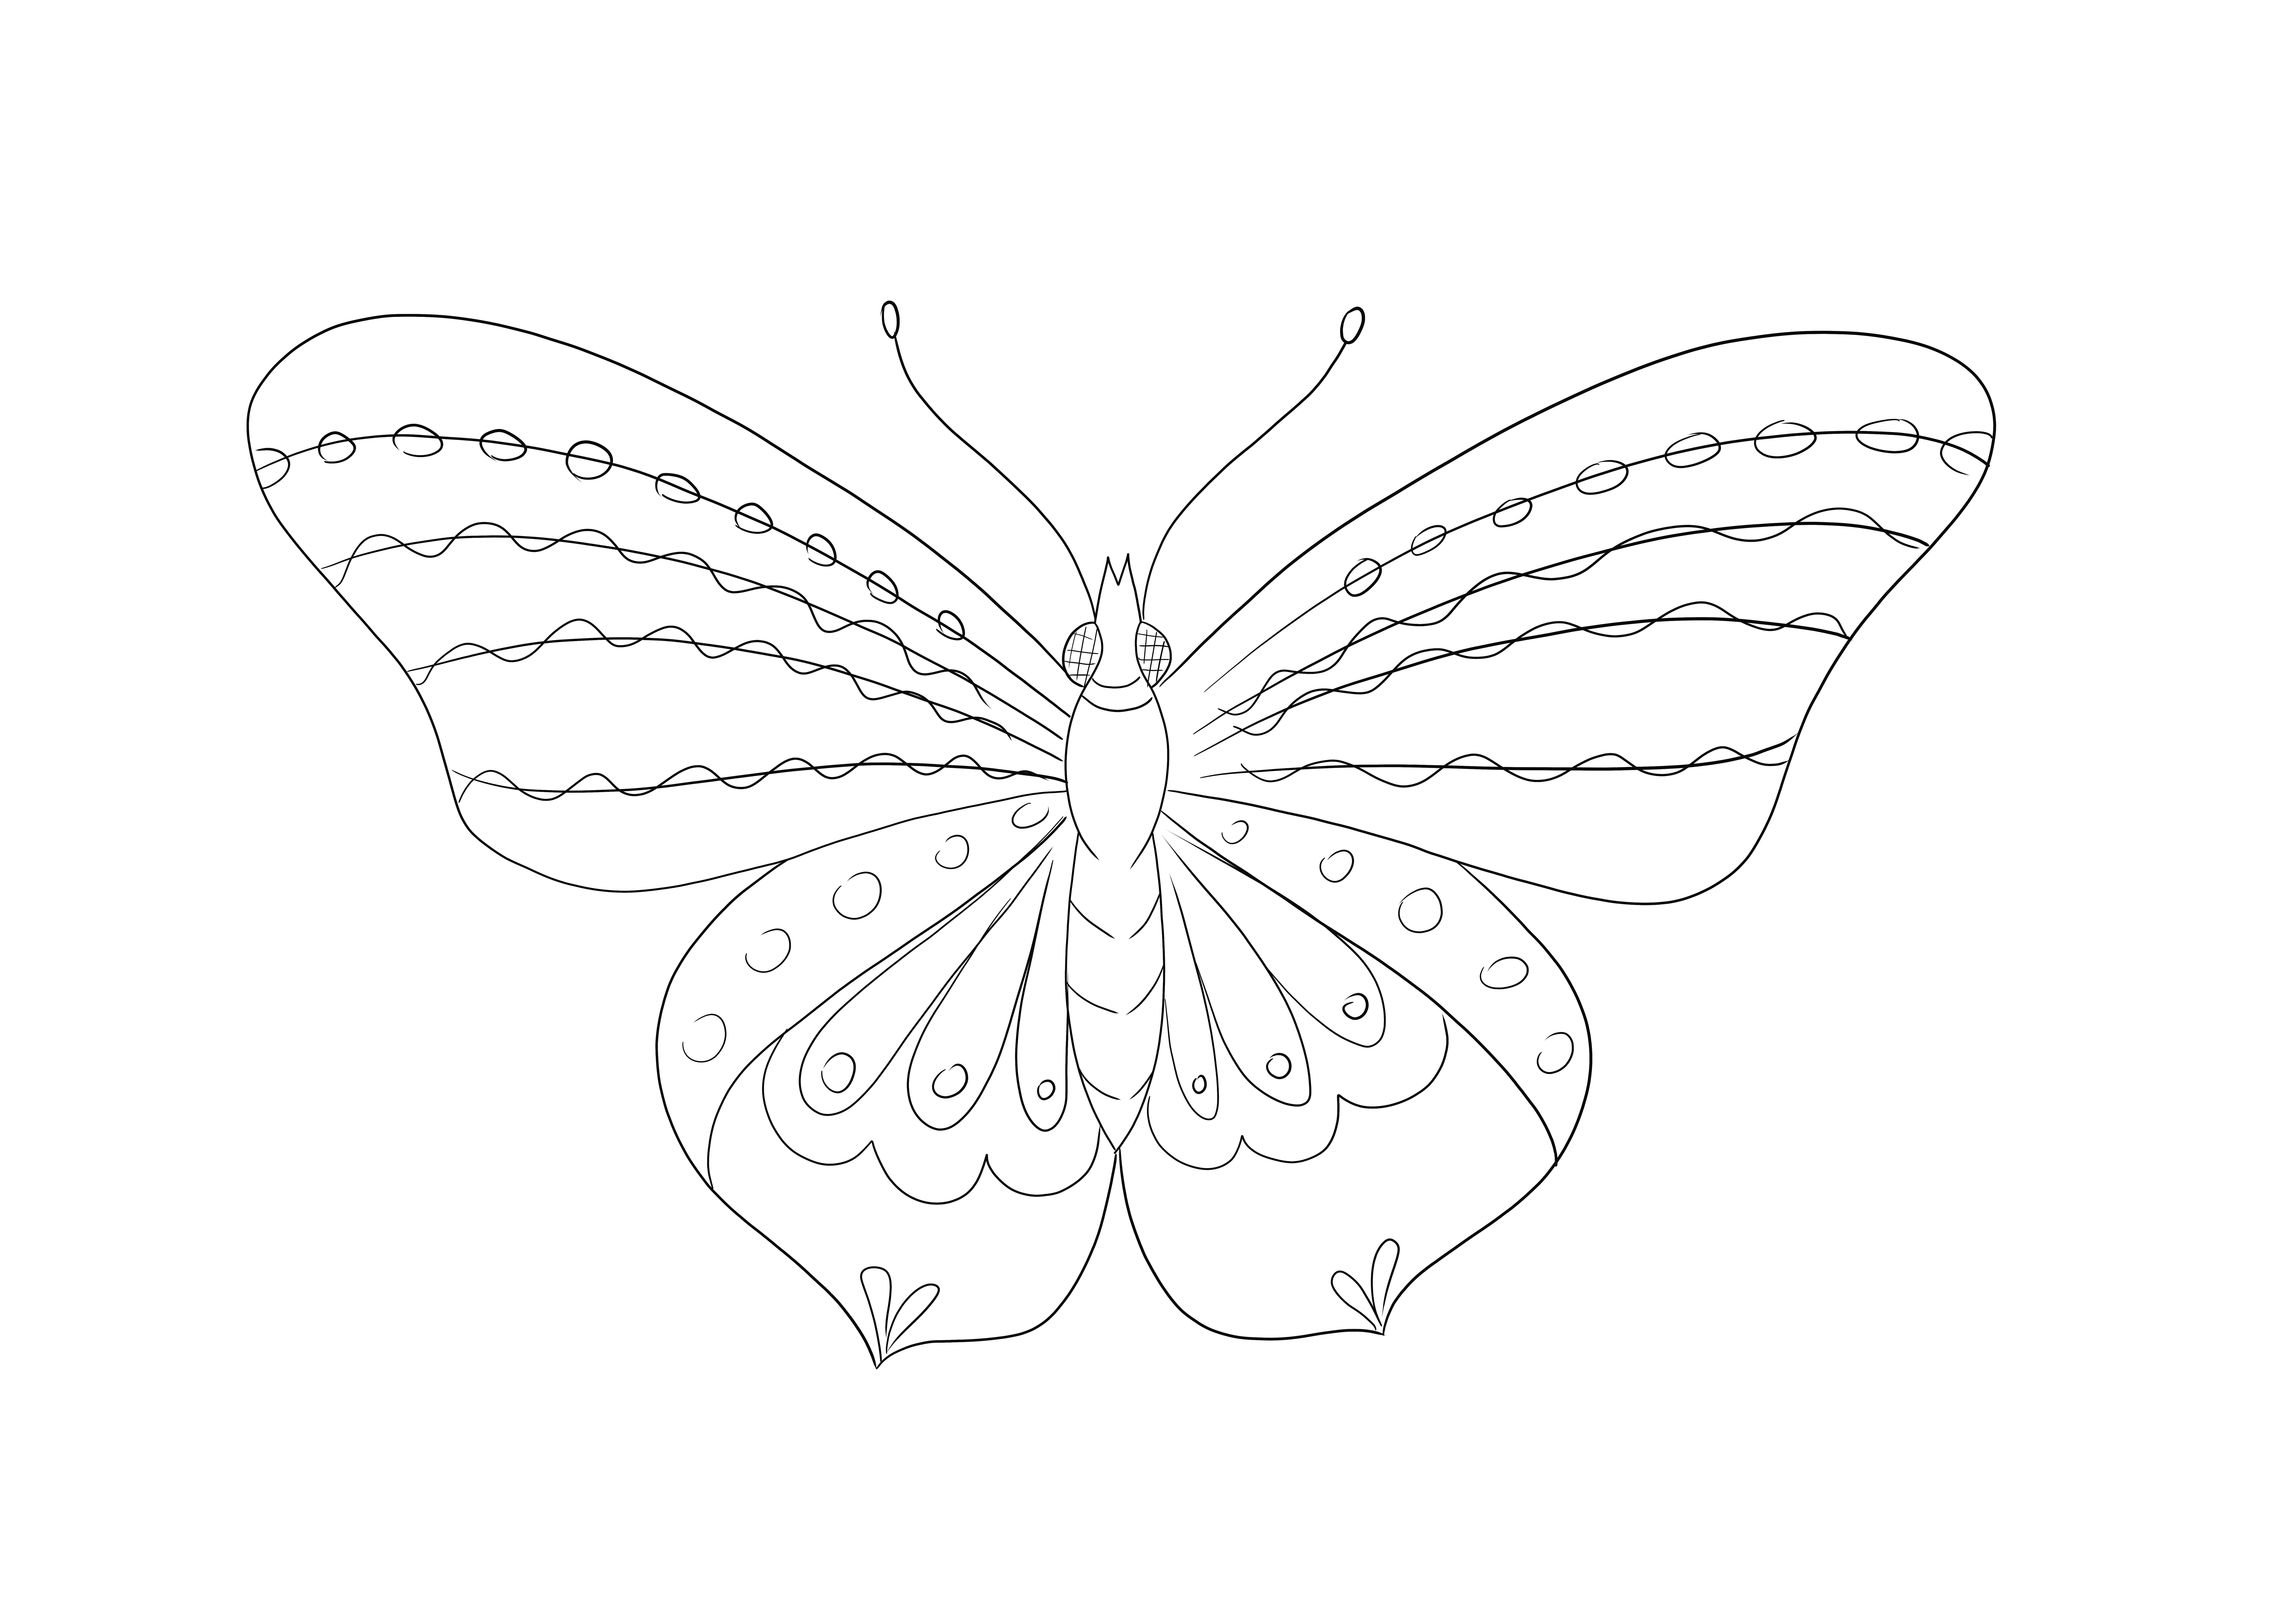 Easy lines for coloring a beautiful butterfly free to download